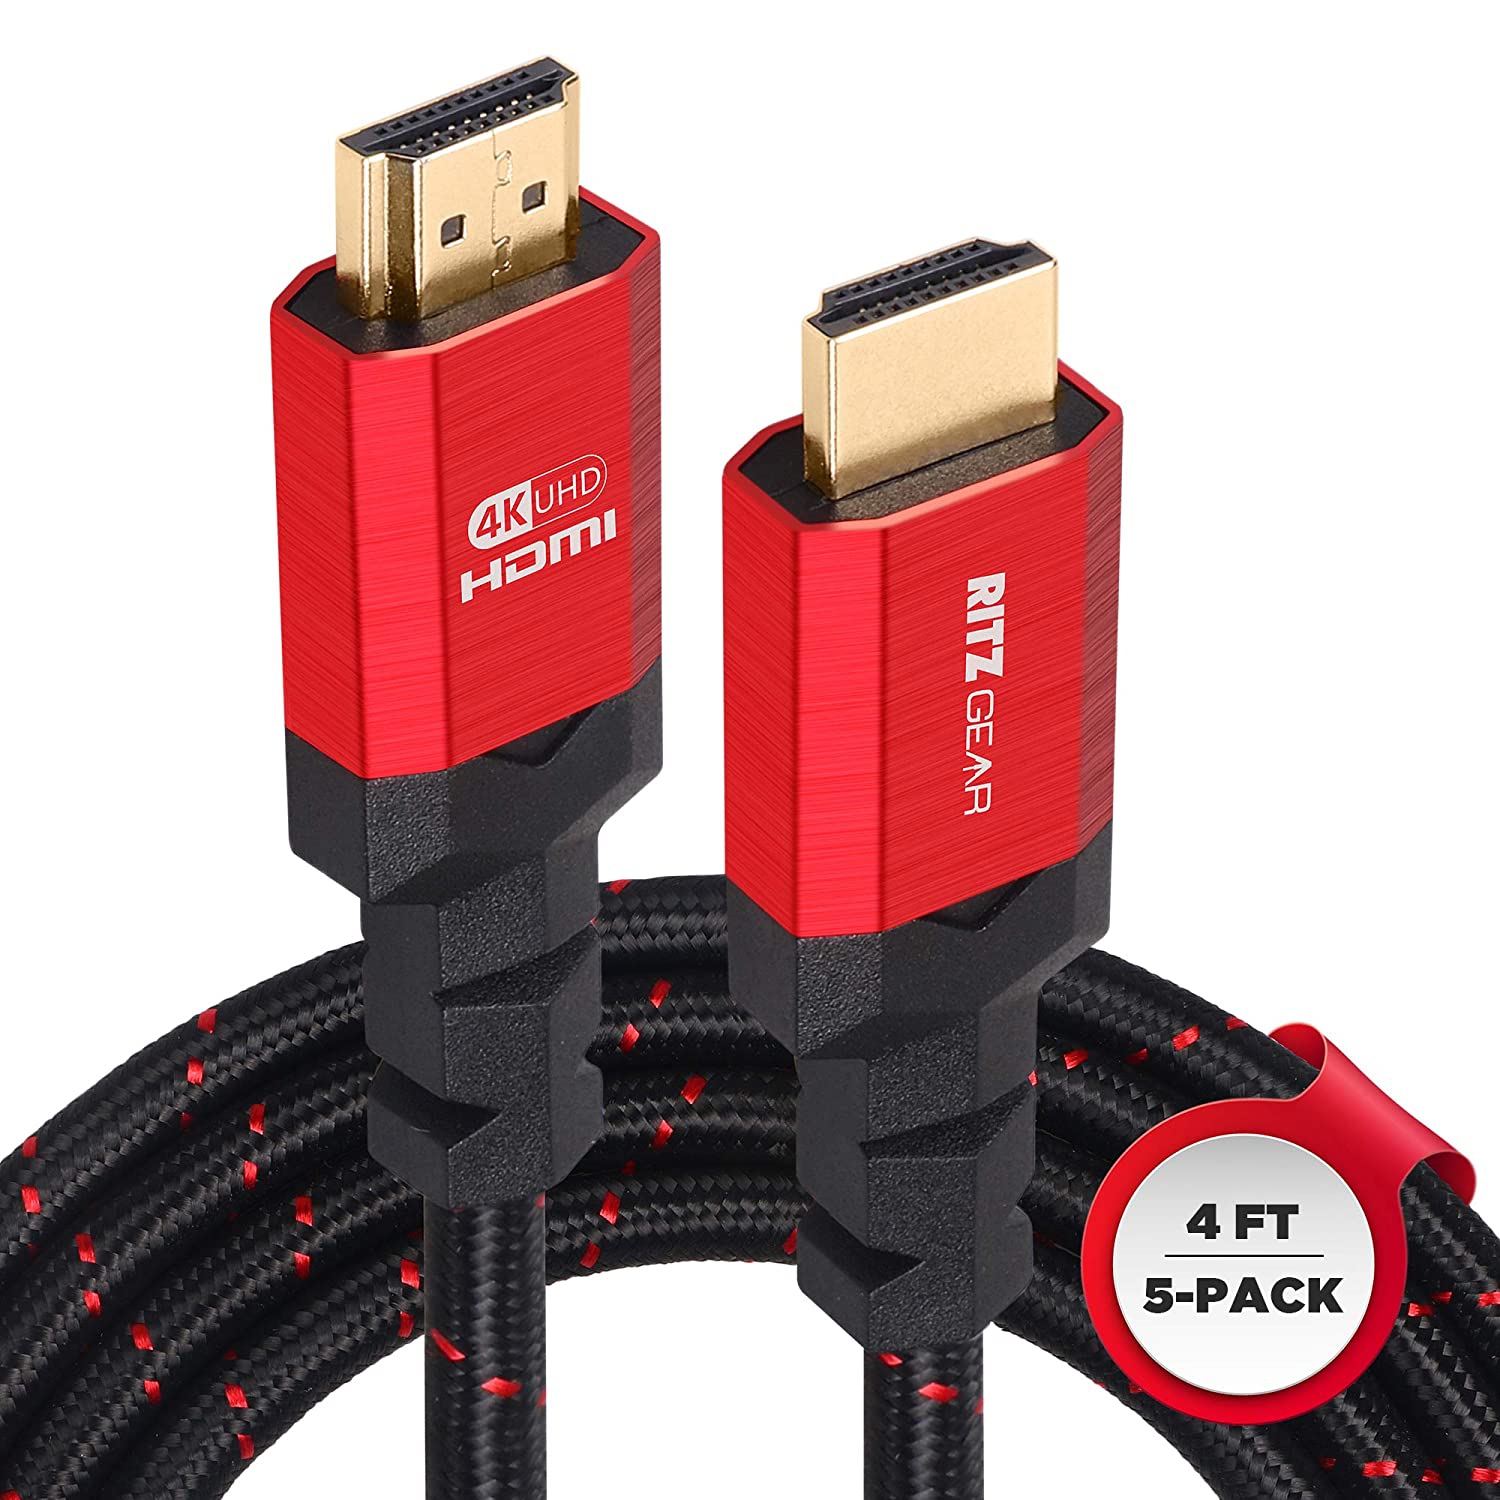 Ritz Gear 4K HDMI Cable 4 ft [5 Pack] Braided Nylon Cord & Gold Connectors, High Speed HDMI 2.0 with Ethernet, Compatible with PS5, PS4, PS3, Xbox, Roku, Apple TV, HDTV, Blu-ray, Laptop, PC, Monitor